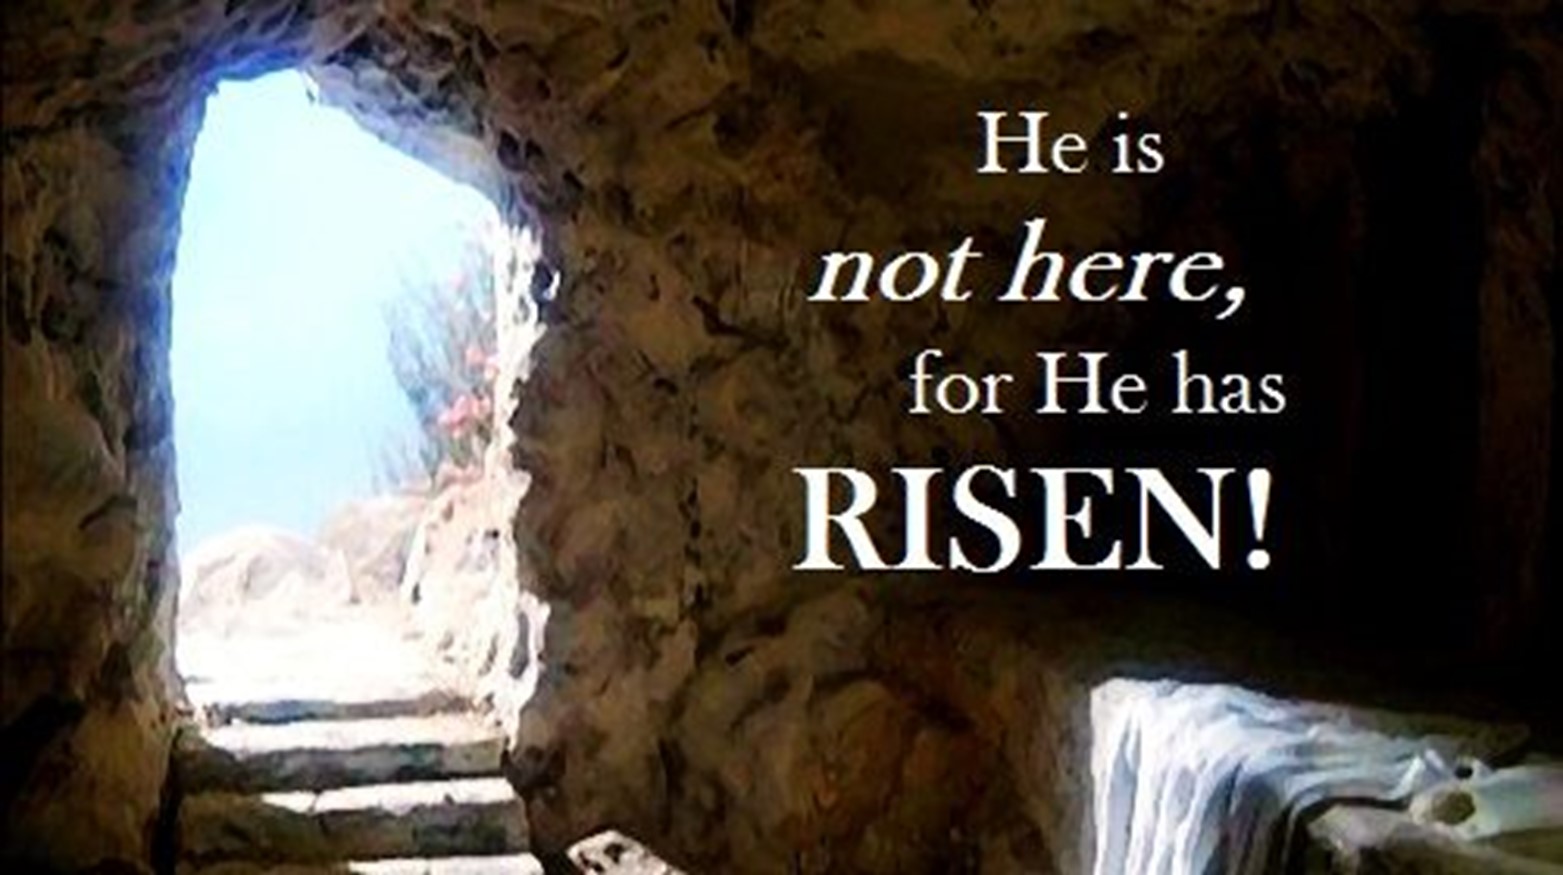 He has risen image text on image